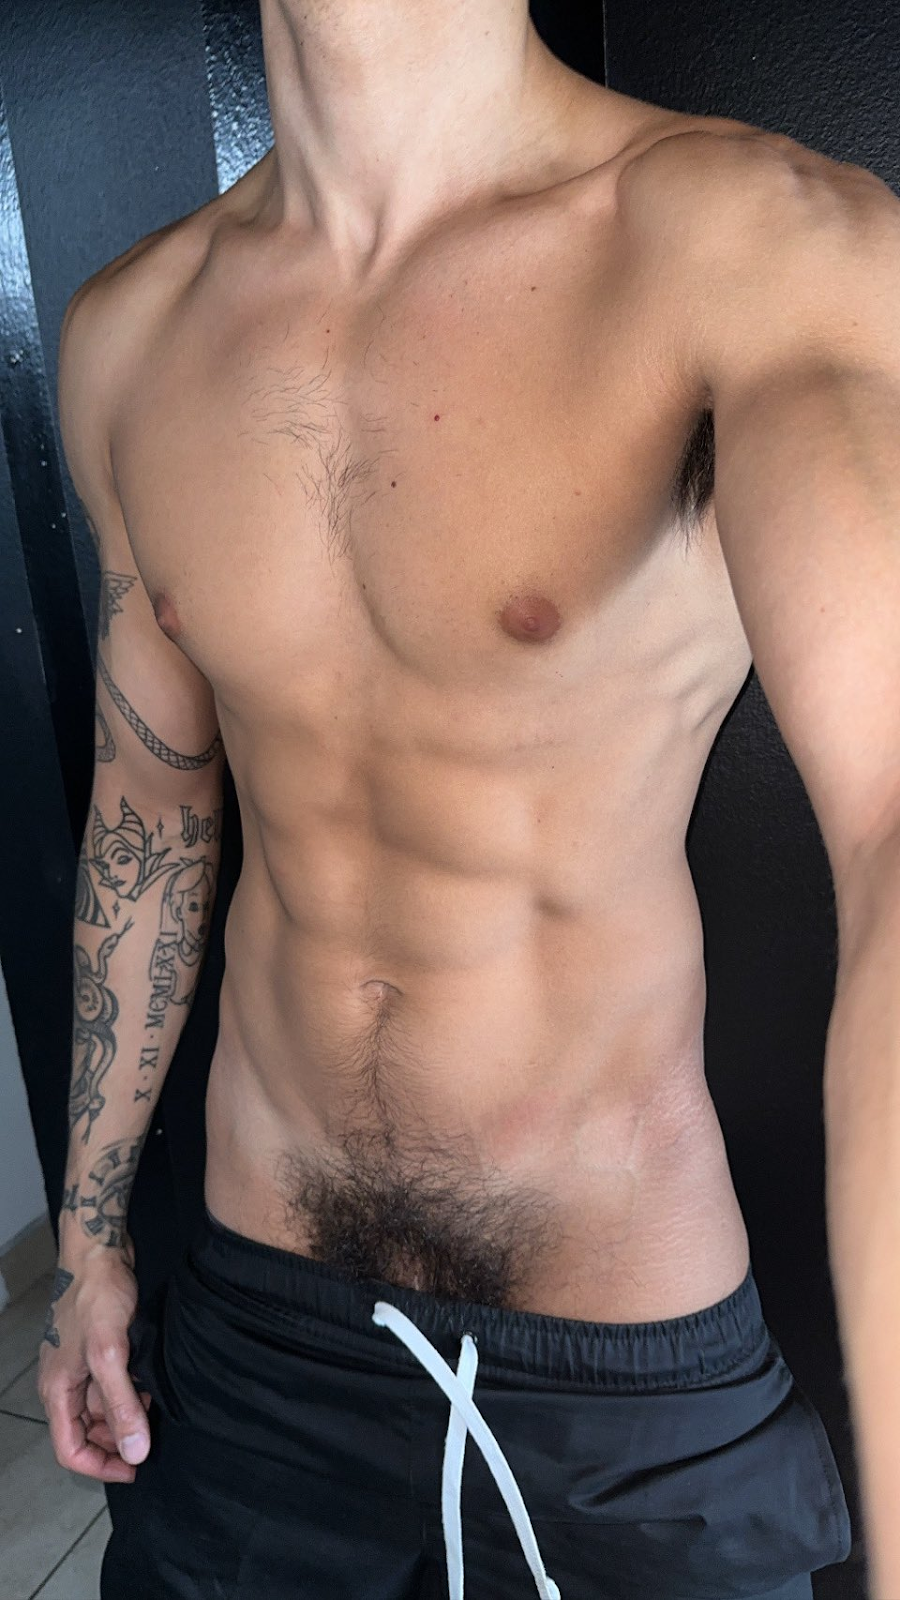 Angel Elias shirtless showing off his hairy bush and abs and arm tattoo in selfie for onlyfans gay content